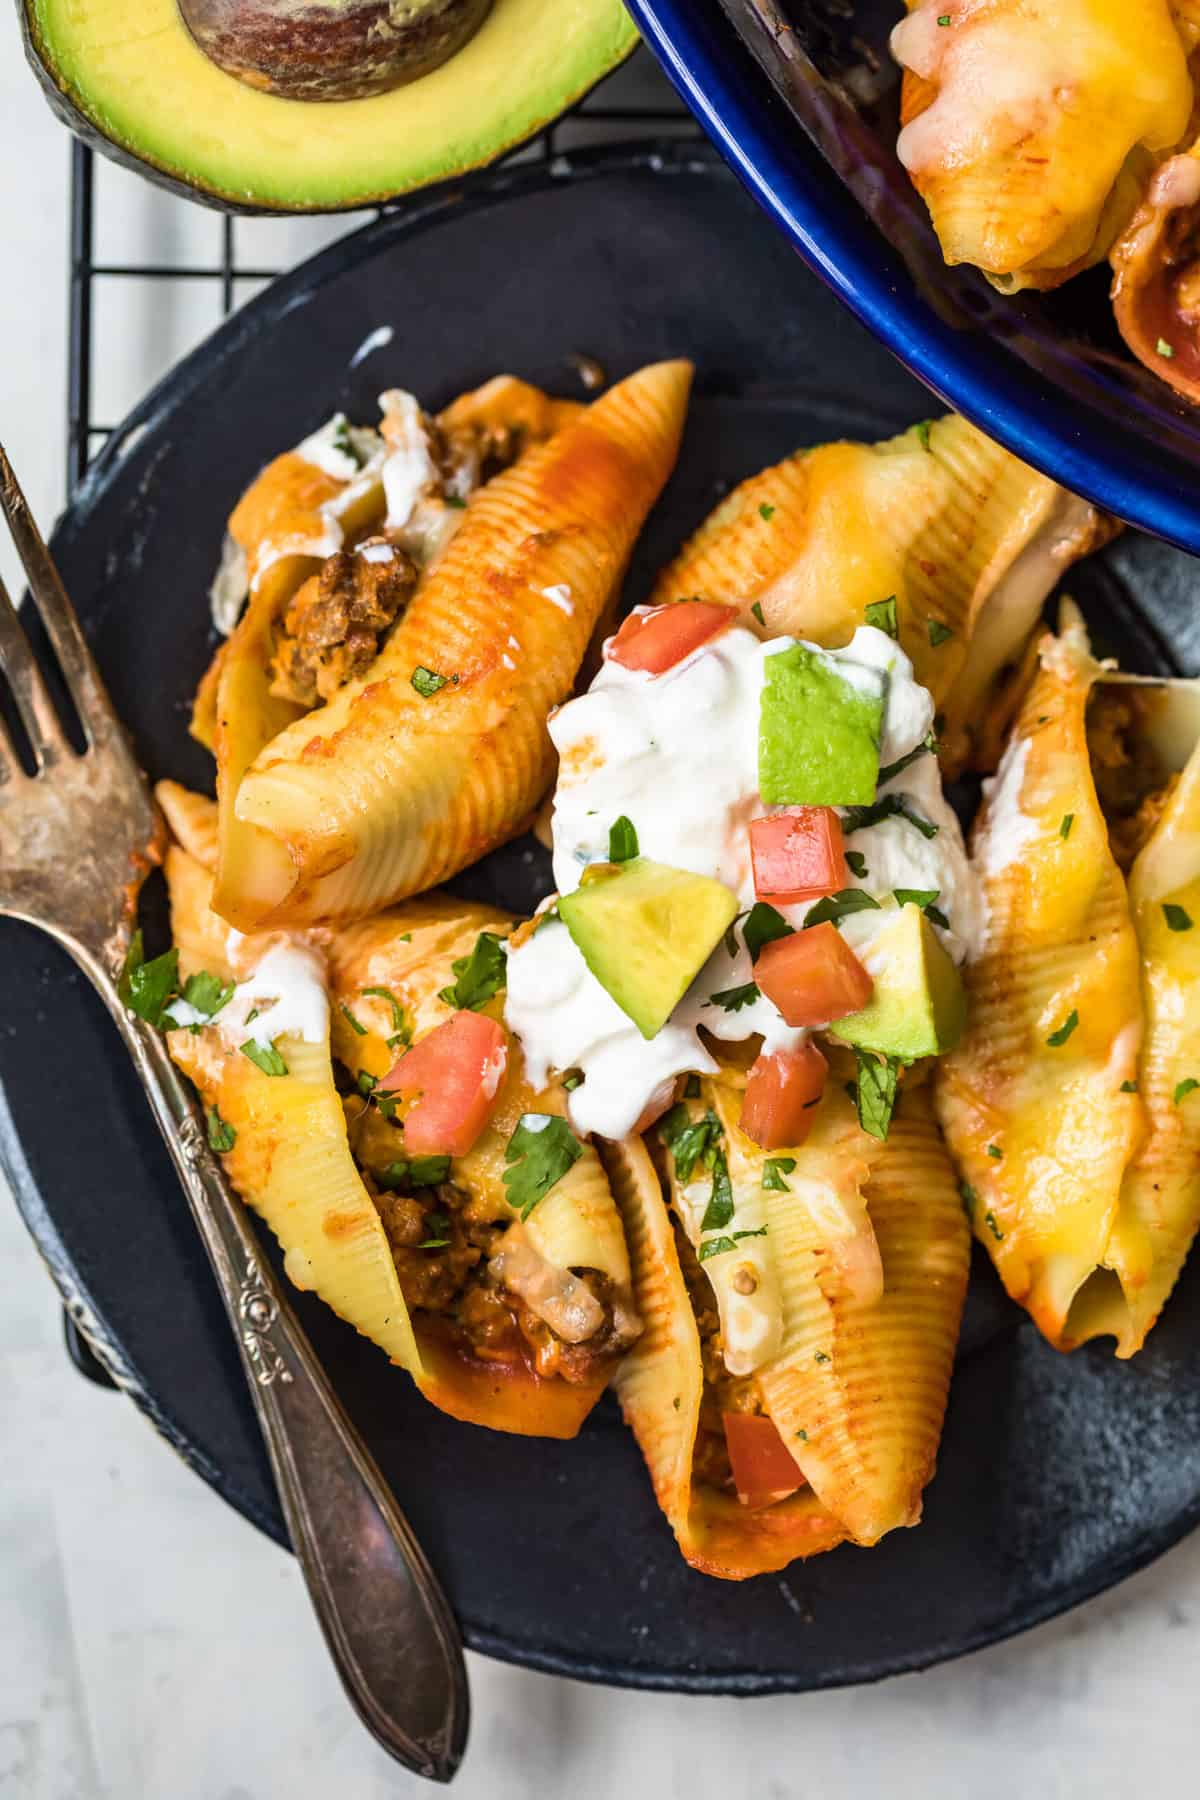 https://www.thecookierookie.com/wp-content/uploads/2020/05/mexican-stuffed-shells-recipe-8-of-8-scaled.jpg